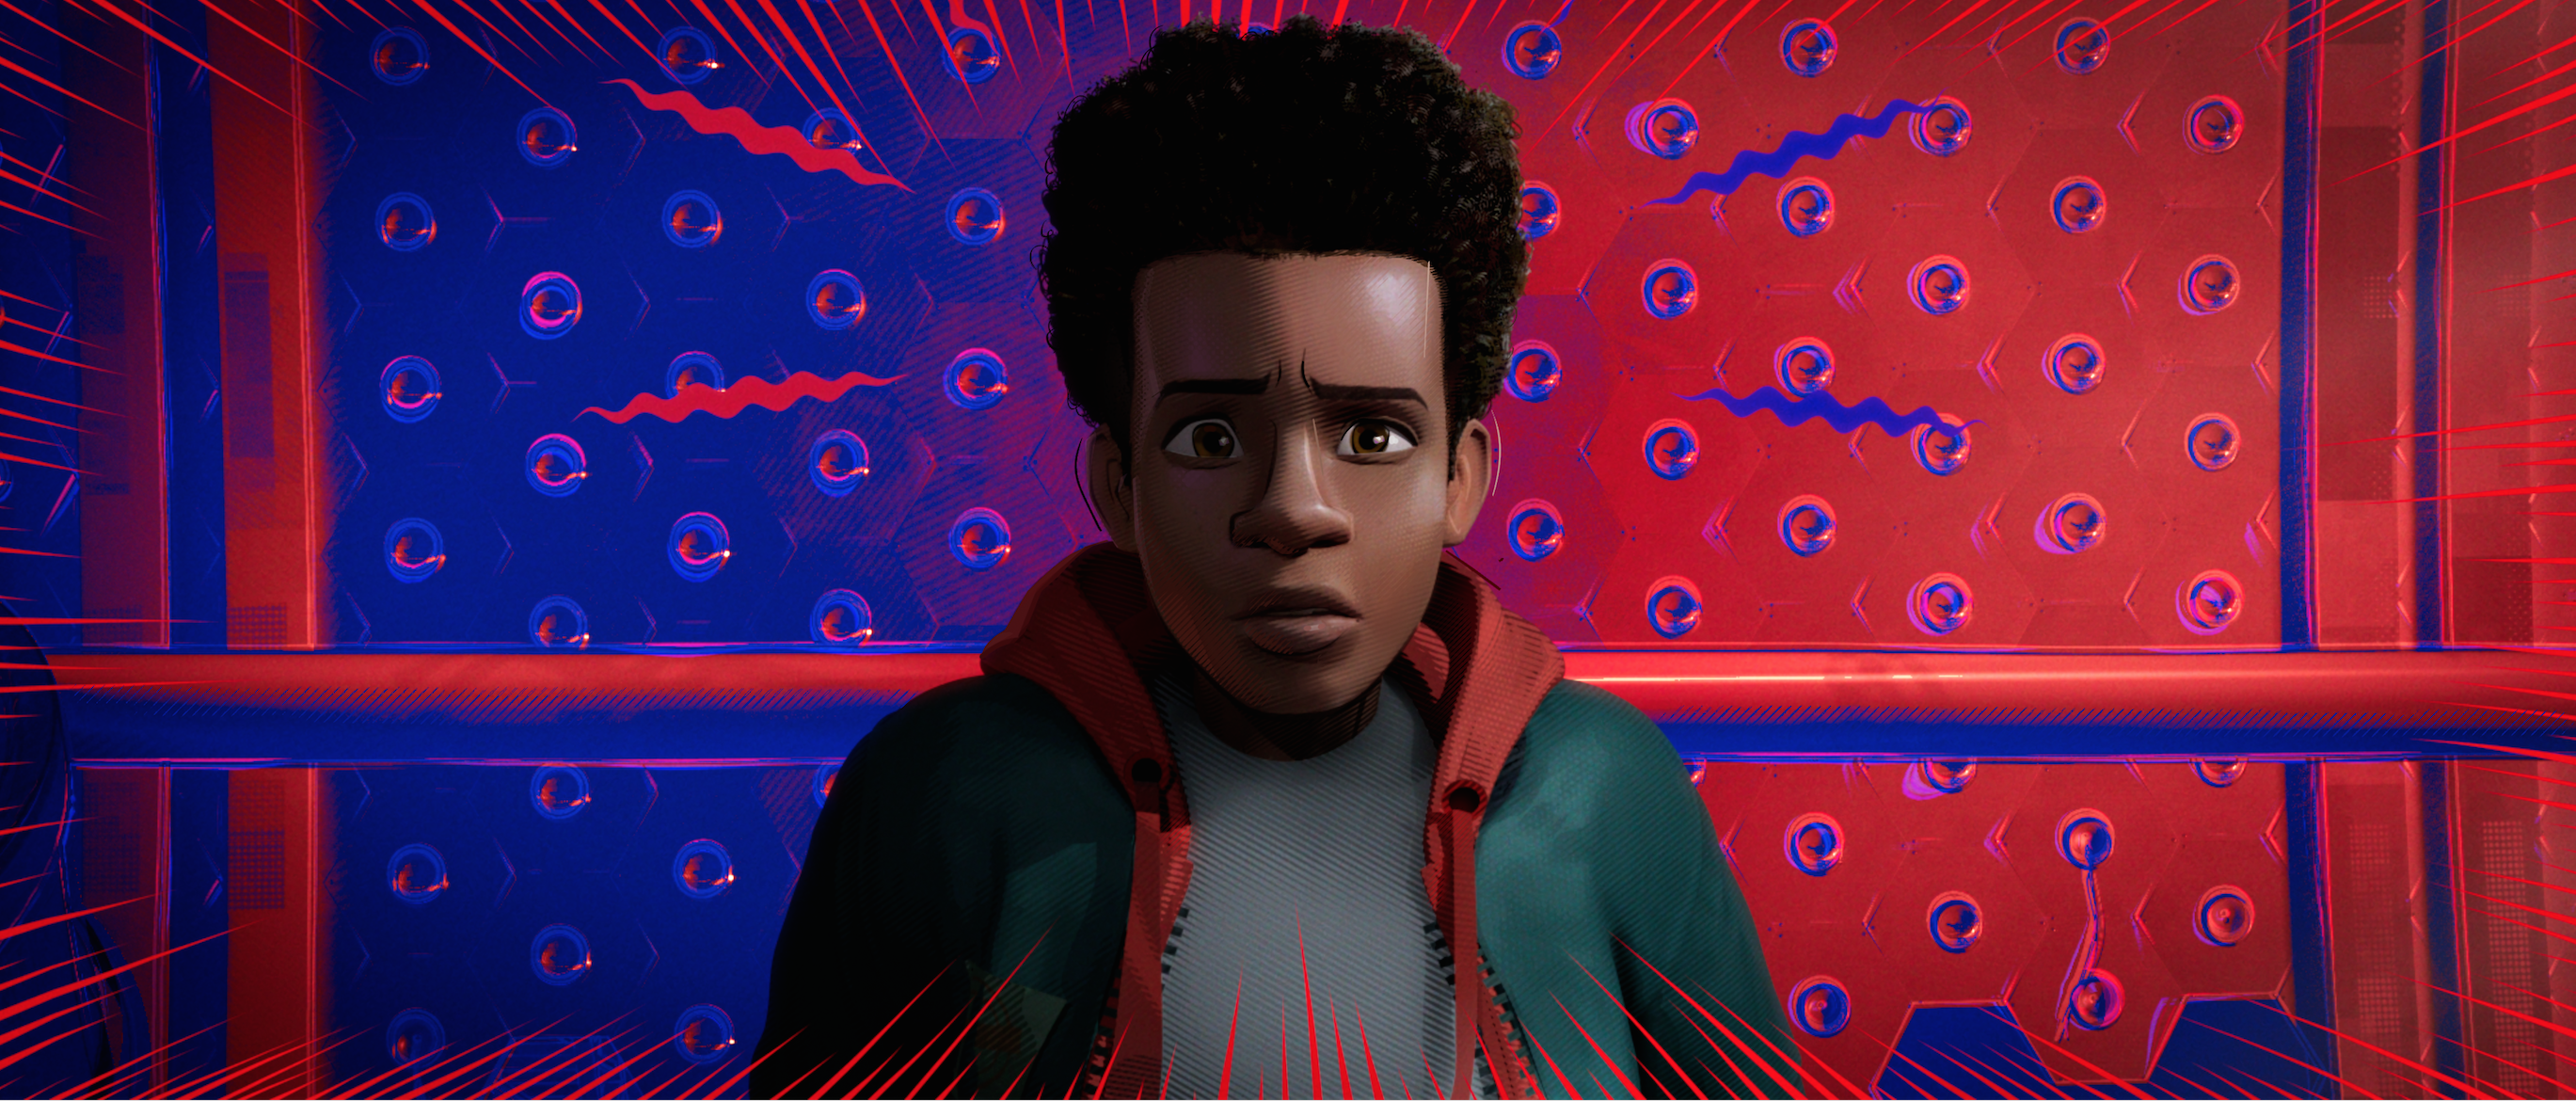 Miles Morales is voiced by Shameik Moore in  Spider-Man: Into the Spider-Verse